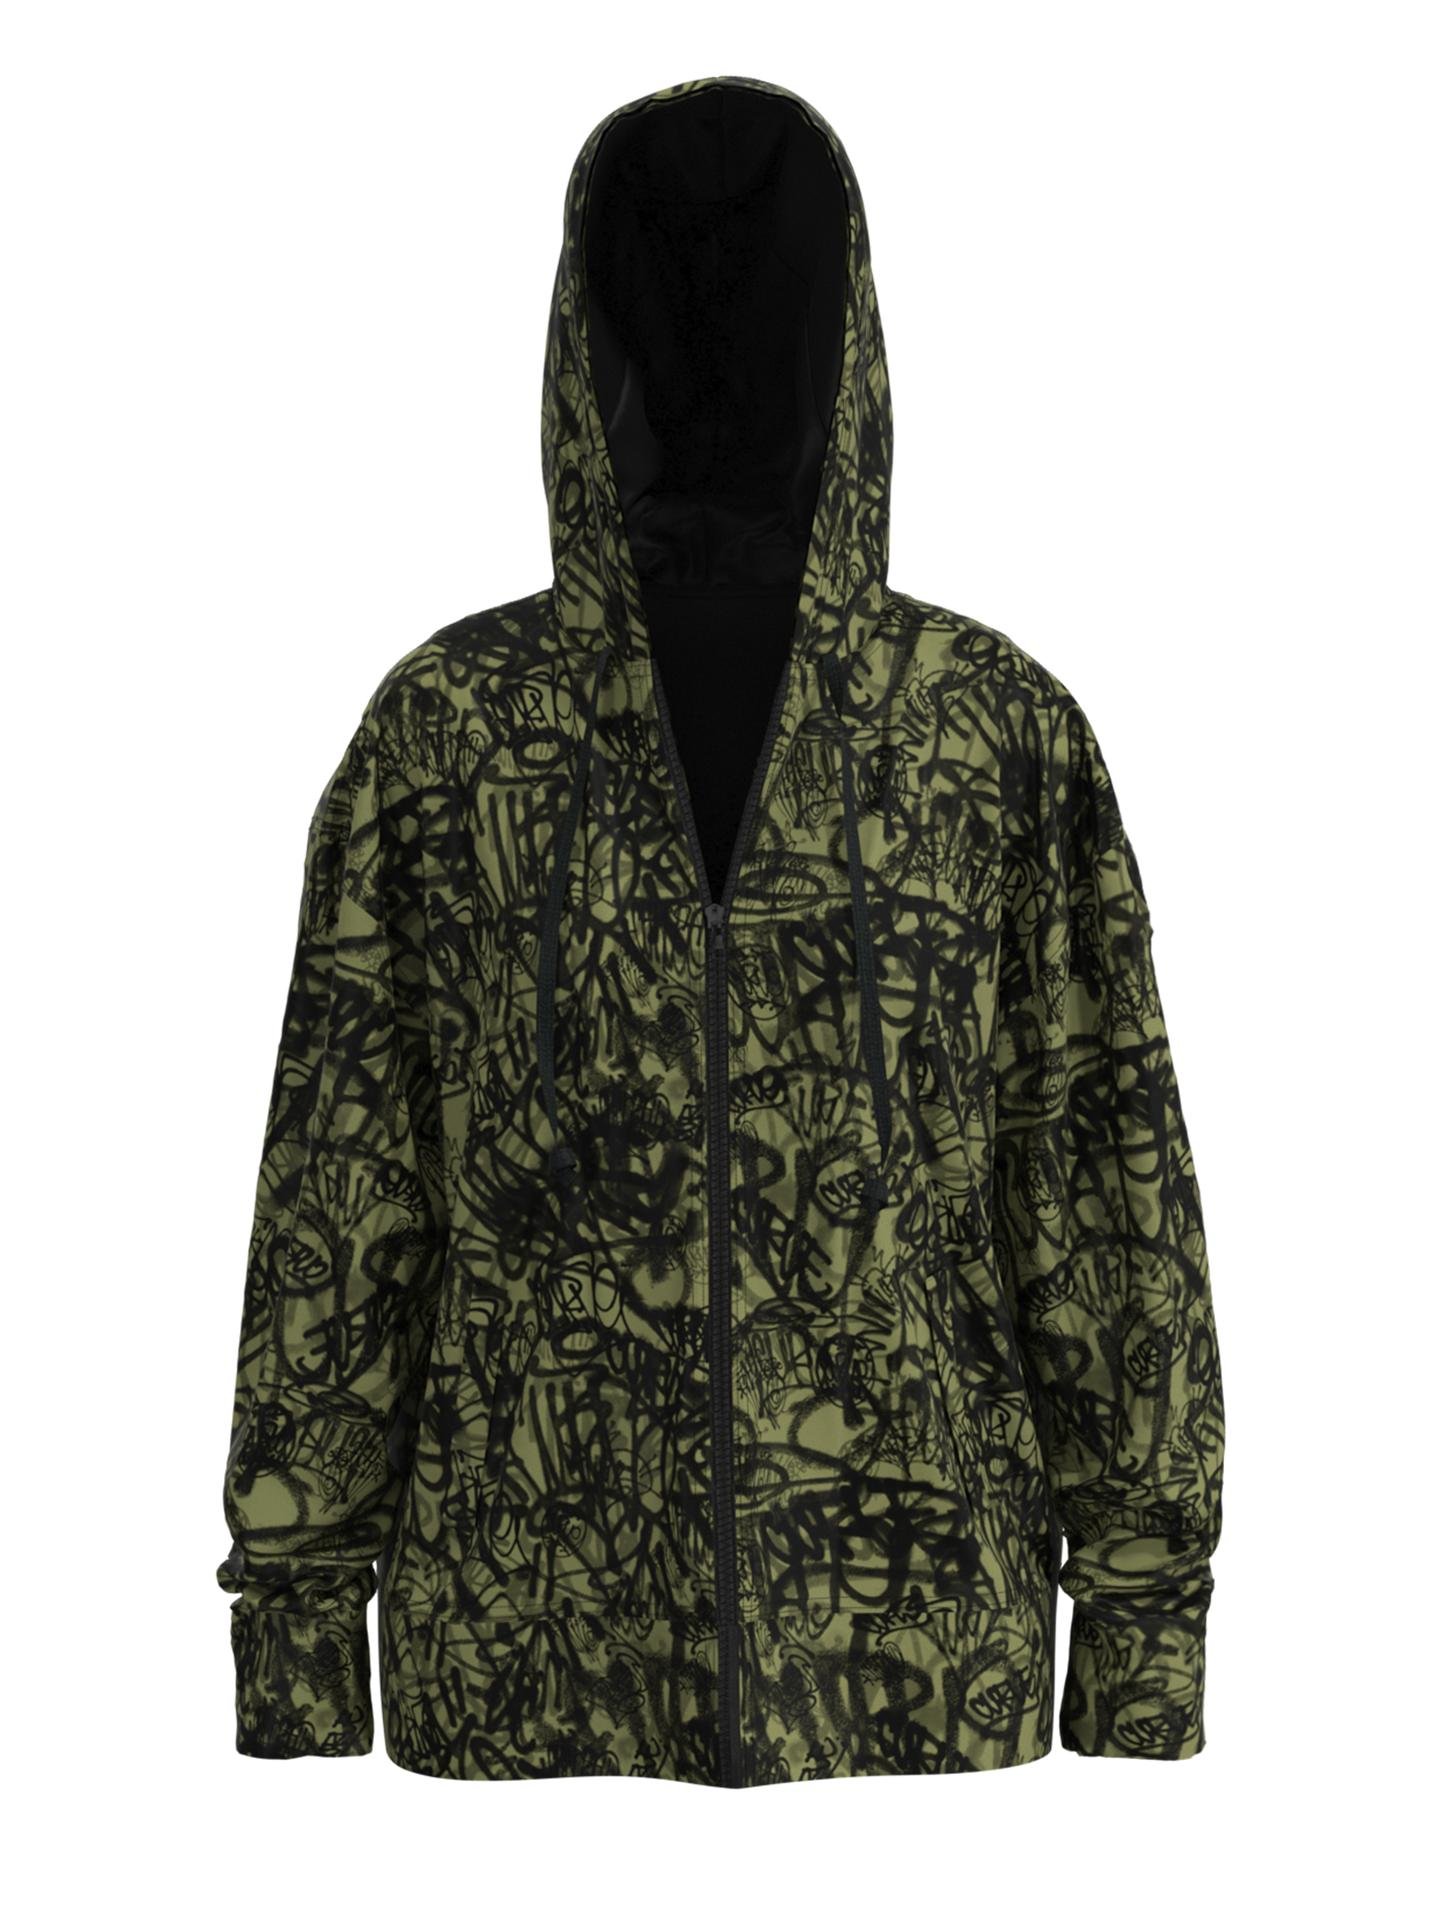 The James Hoodie - Curvazoid Army (Unisex) by ASSEMBLY.FASHION NYFW 2021 DROP NO.01